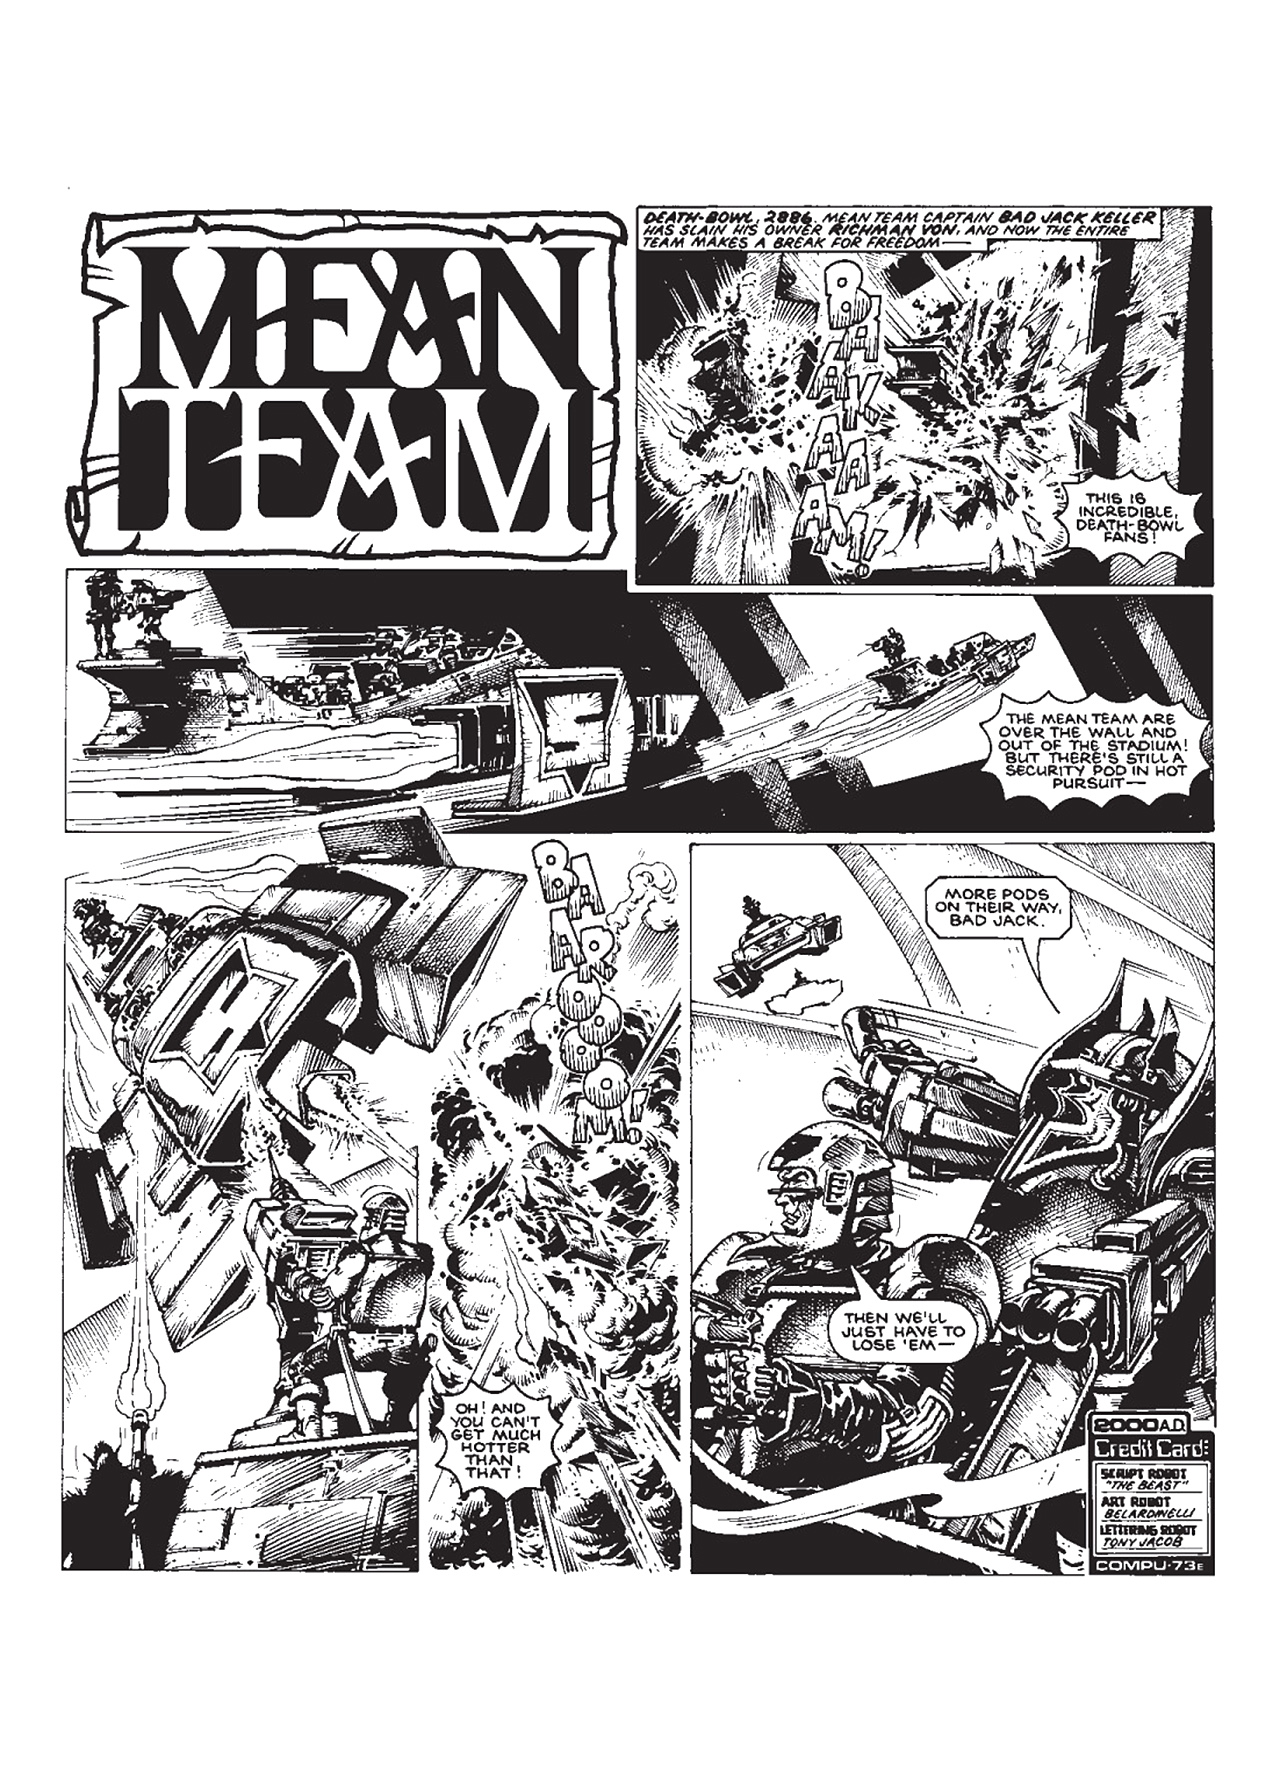 Read online Mean Team comic -  Issue # TPB - 47